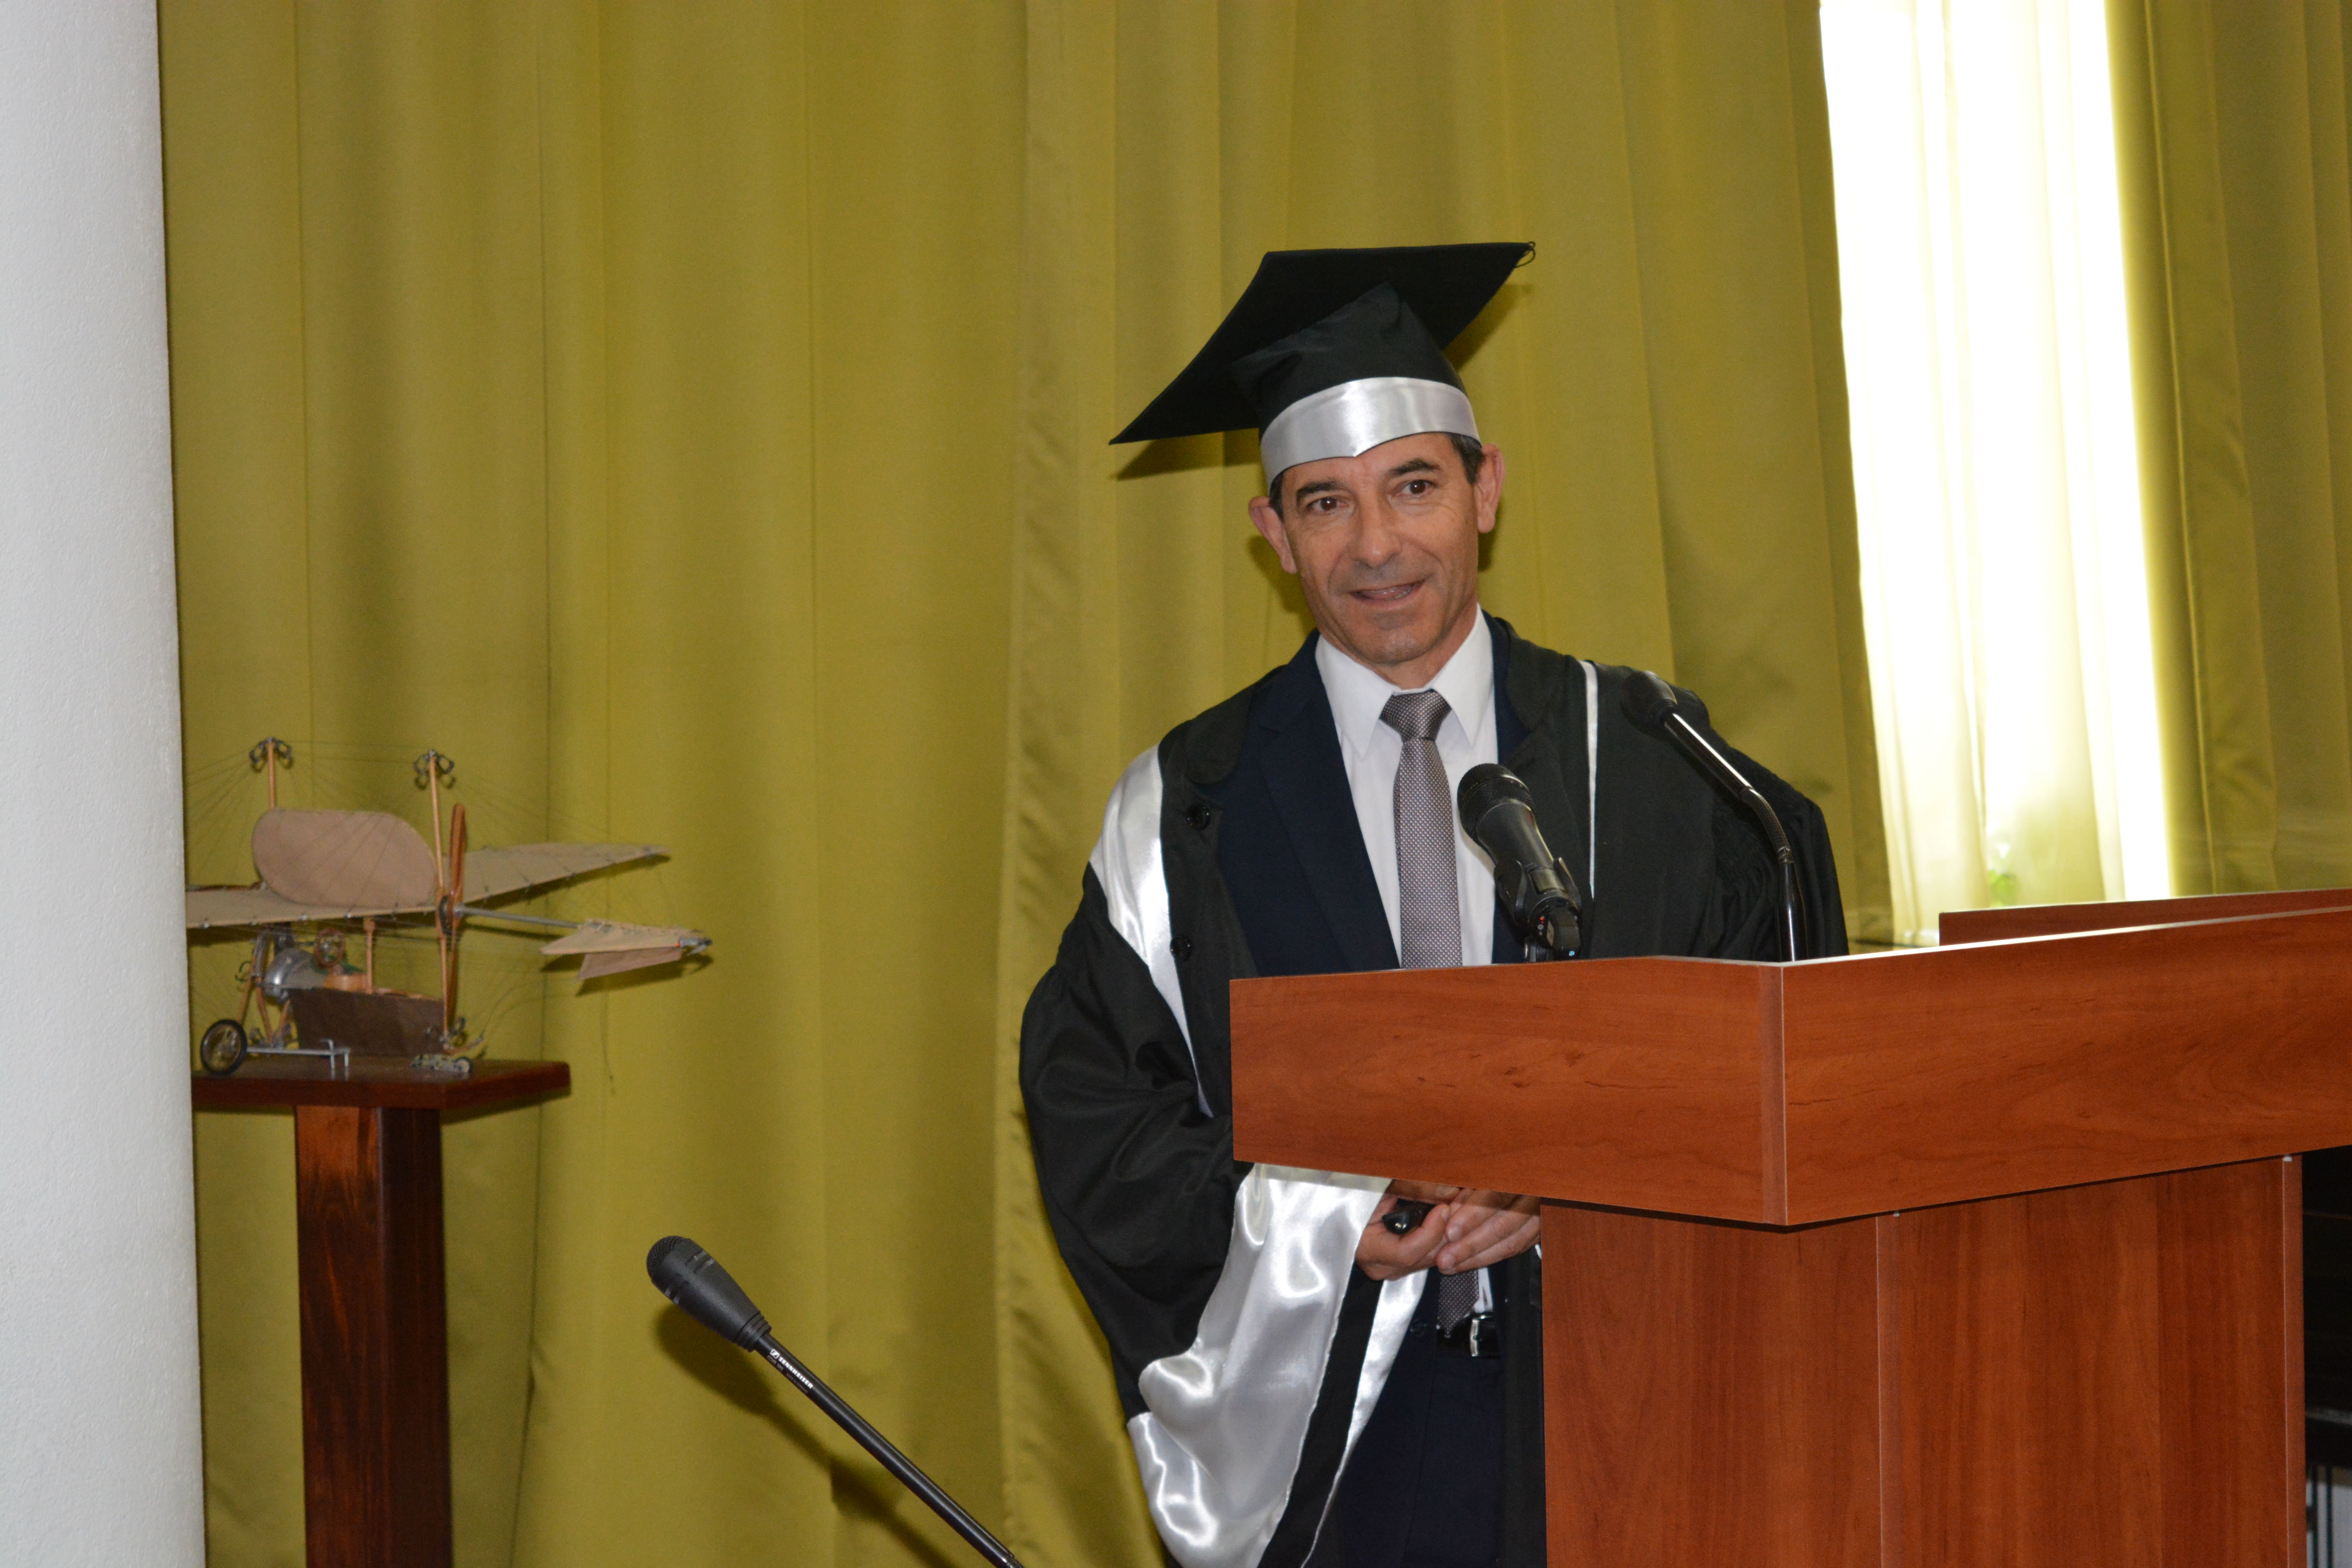 The ceremony of awarding the title of Doctor Honoris Causa of the University POLITEHNICA of Bucharest, to Mr. Serge COSNIER